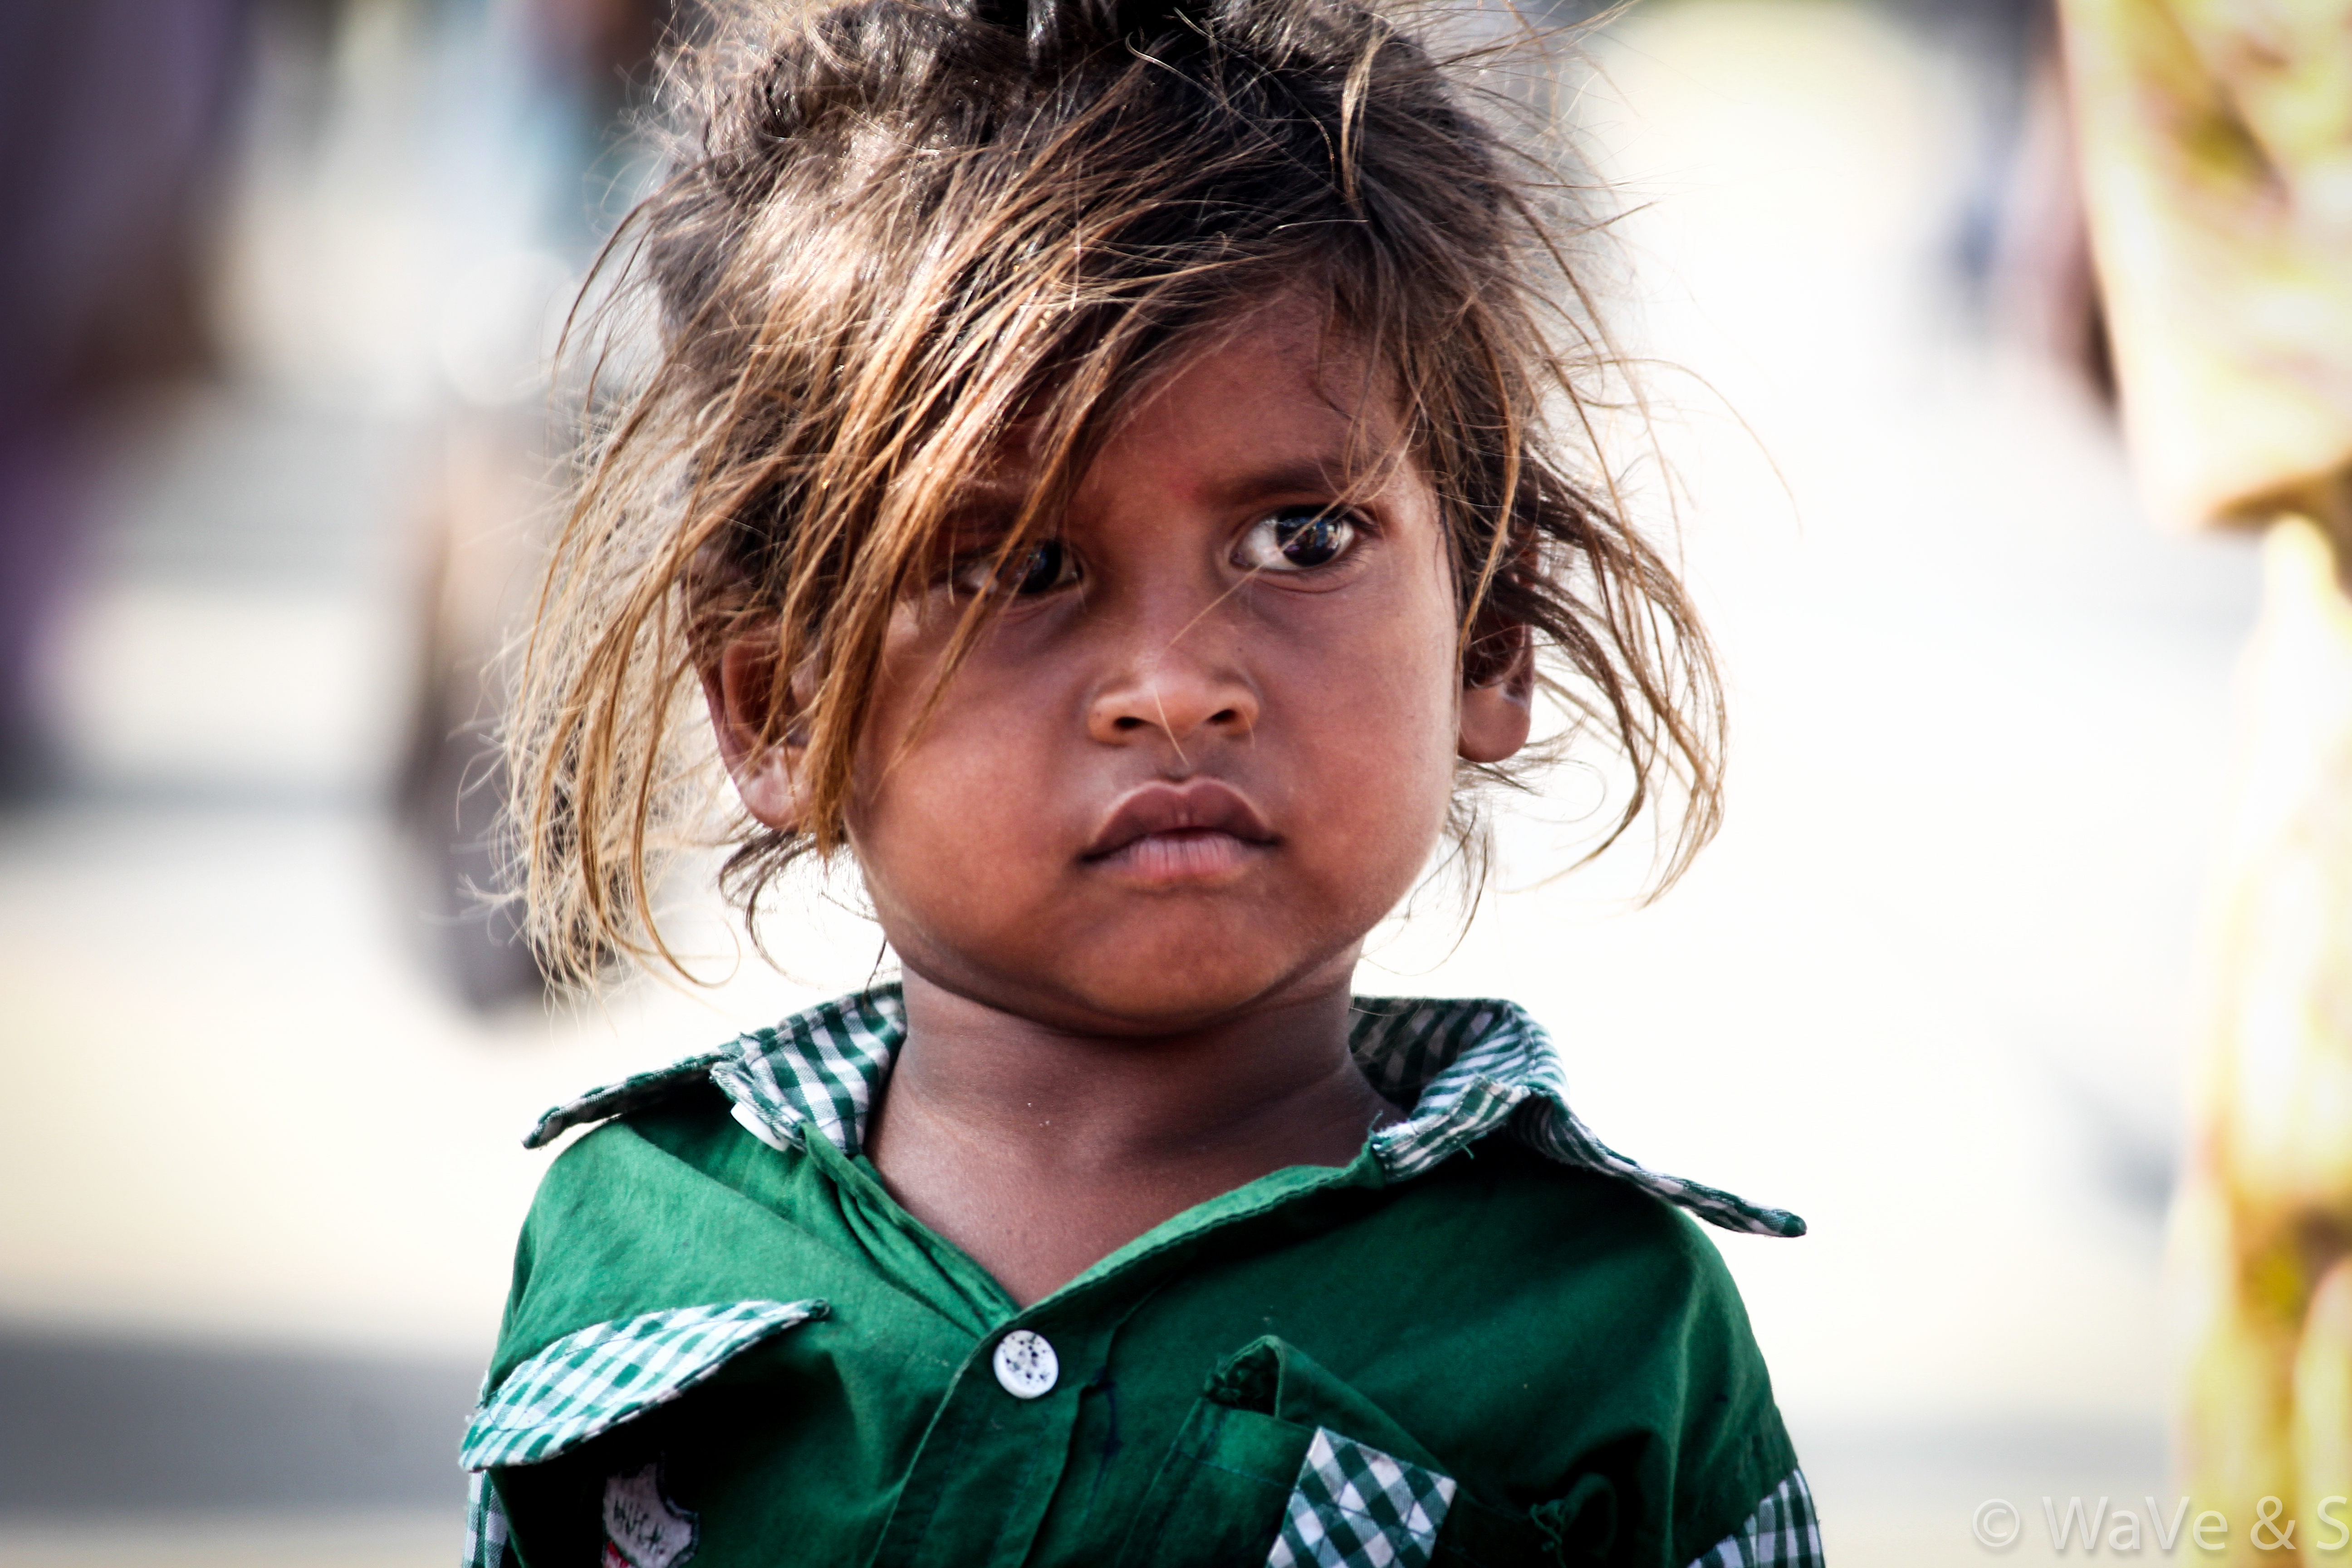 Wallpaper, street, portrait, India, face, kids, hair, candid, Indian, human, national, streetphoto, geographic, nationalgeographic, candis 5184x3456